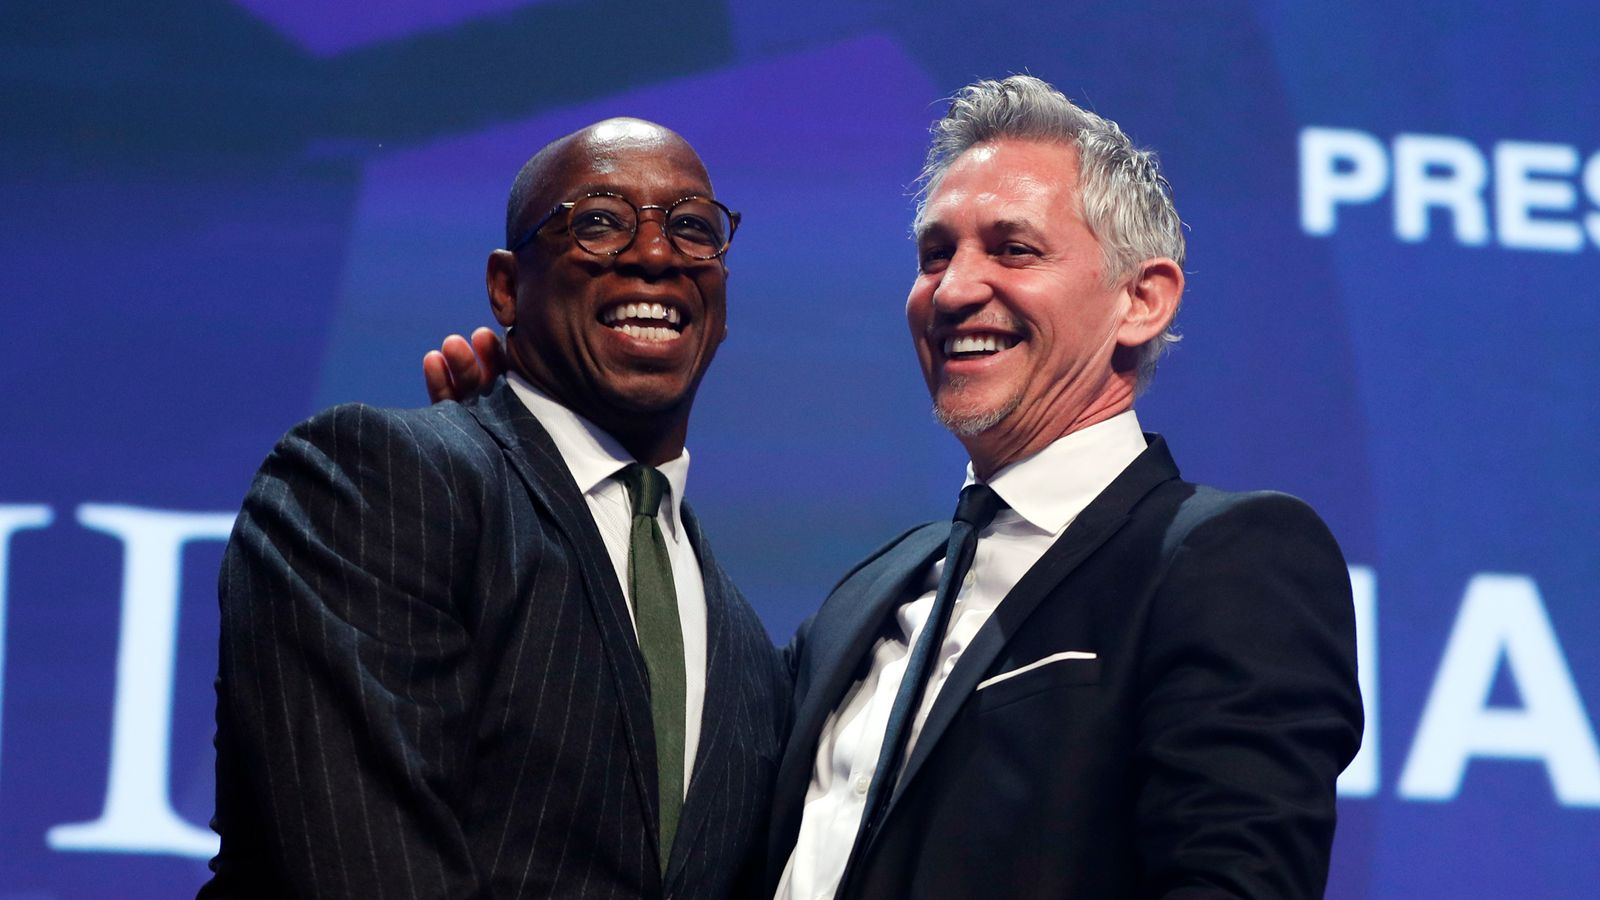 Ian Wright won’t appear on Match of the Day – reaction as Gary Lineker steps back | UK News